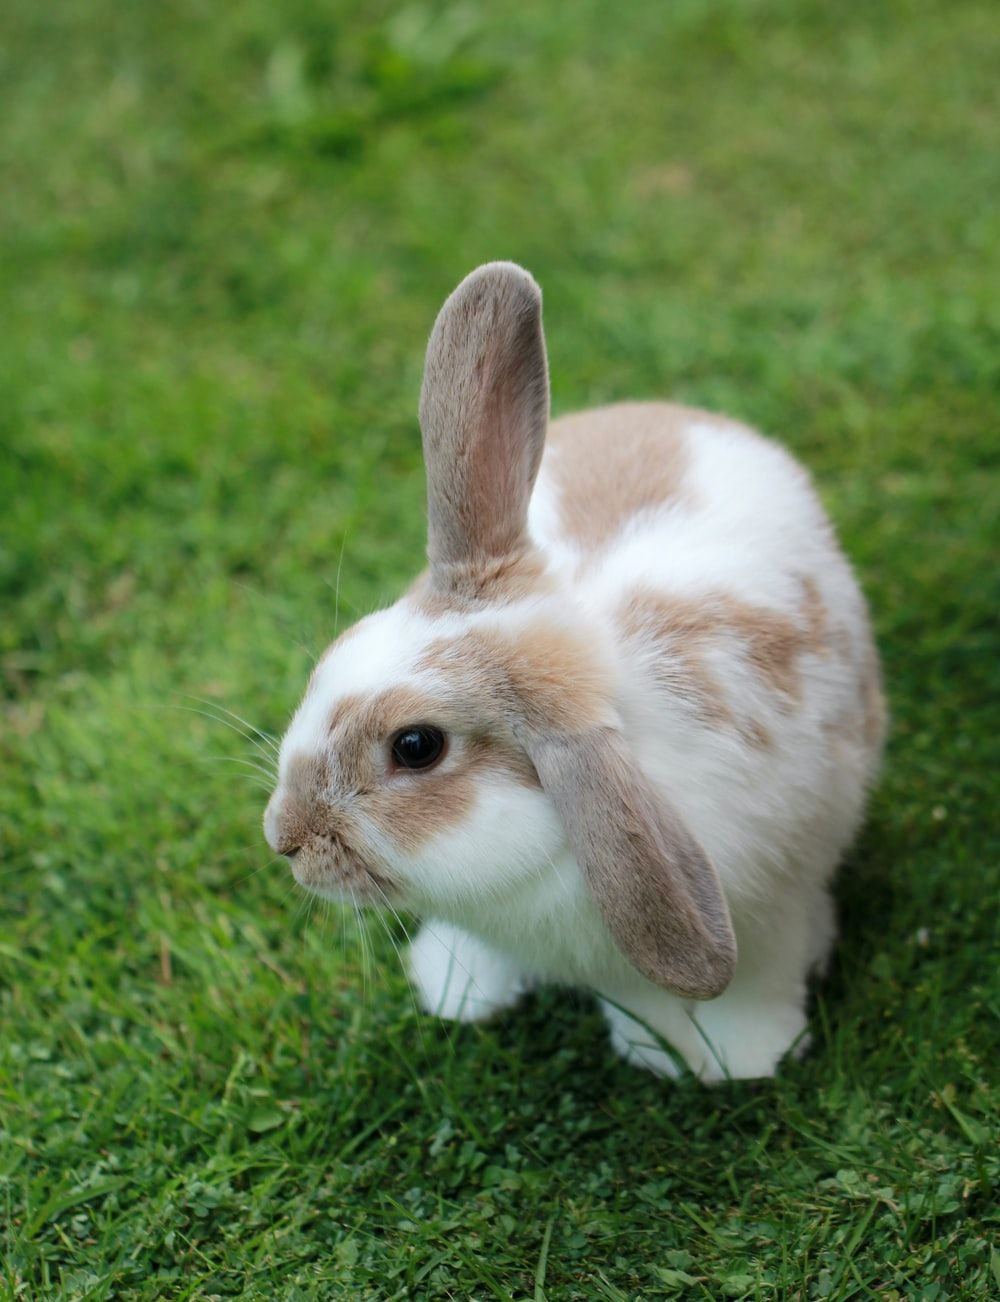 Bunny Picture [HQ]. Download Free Image